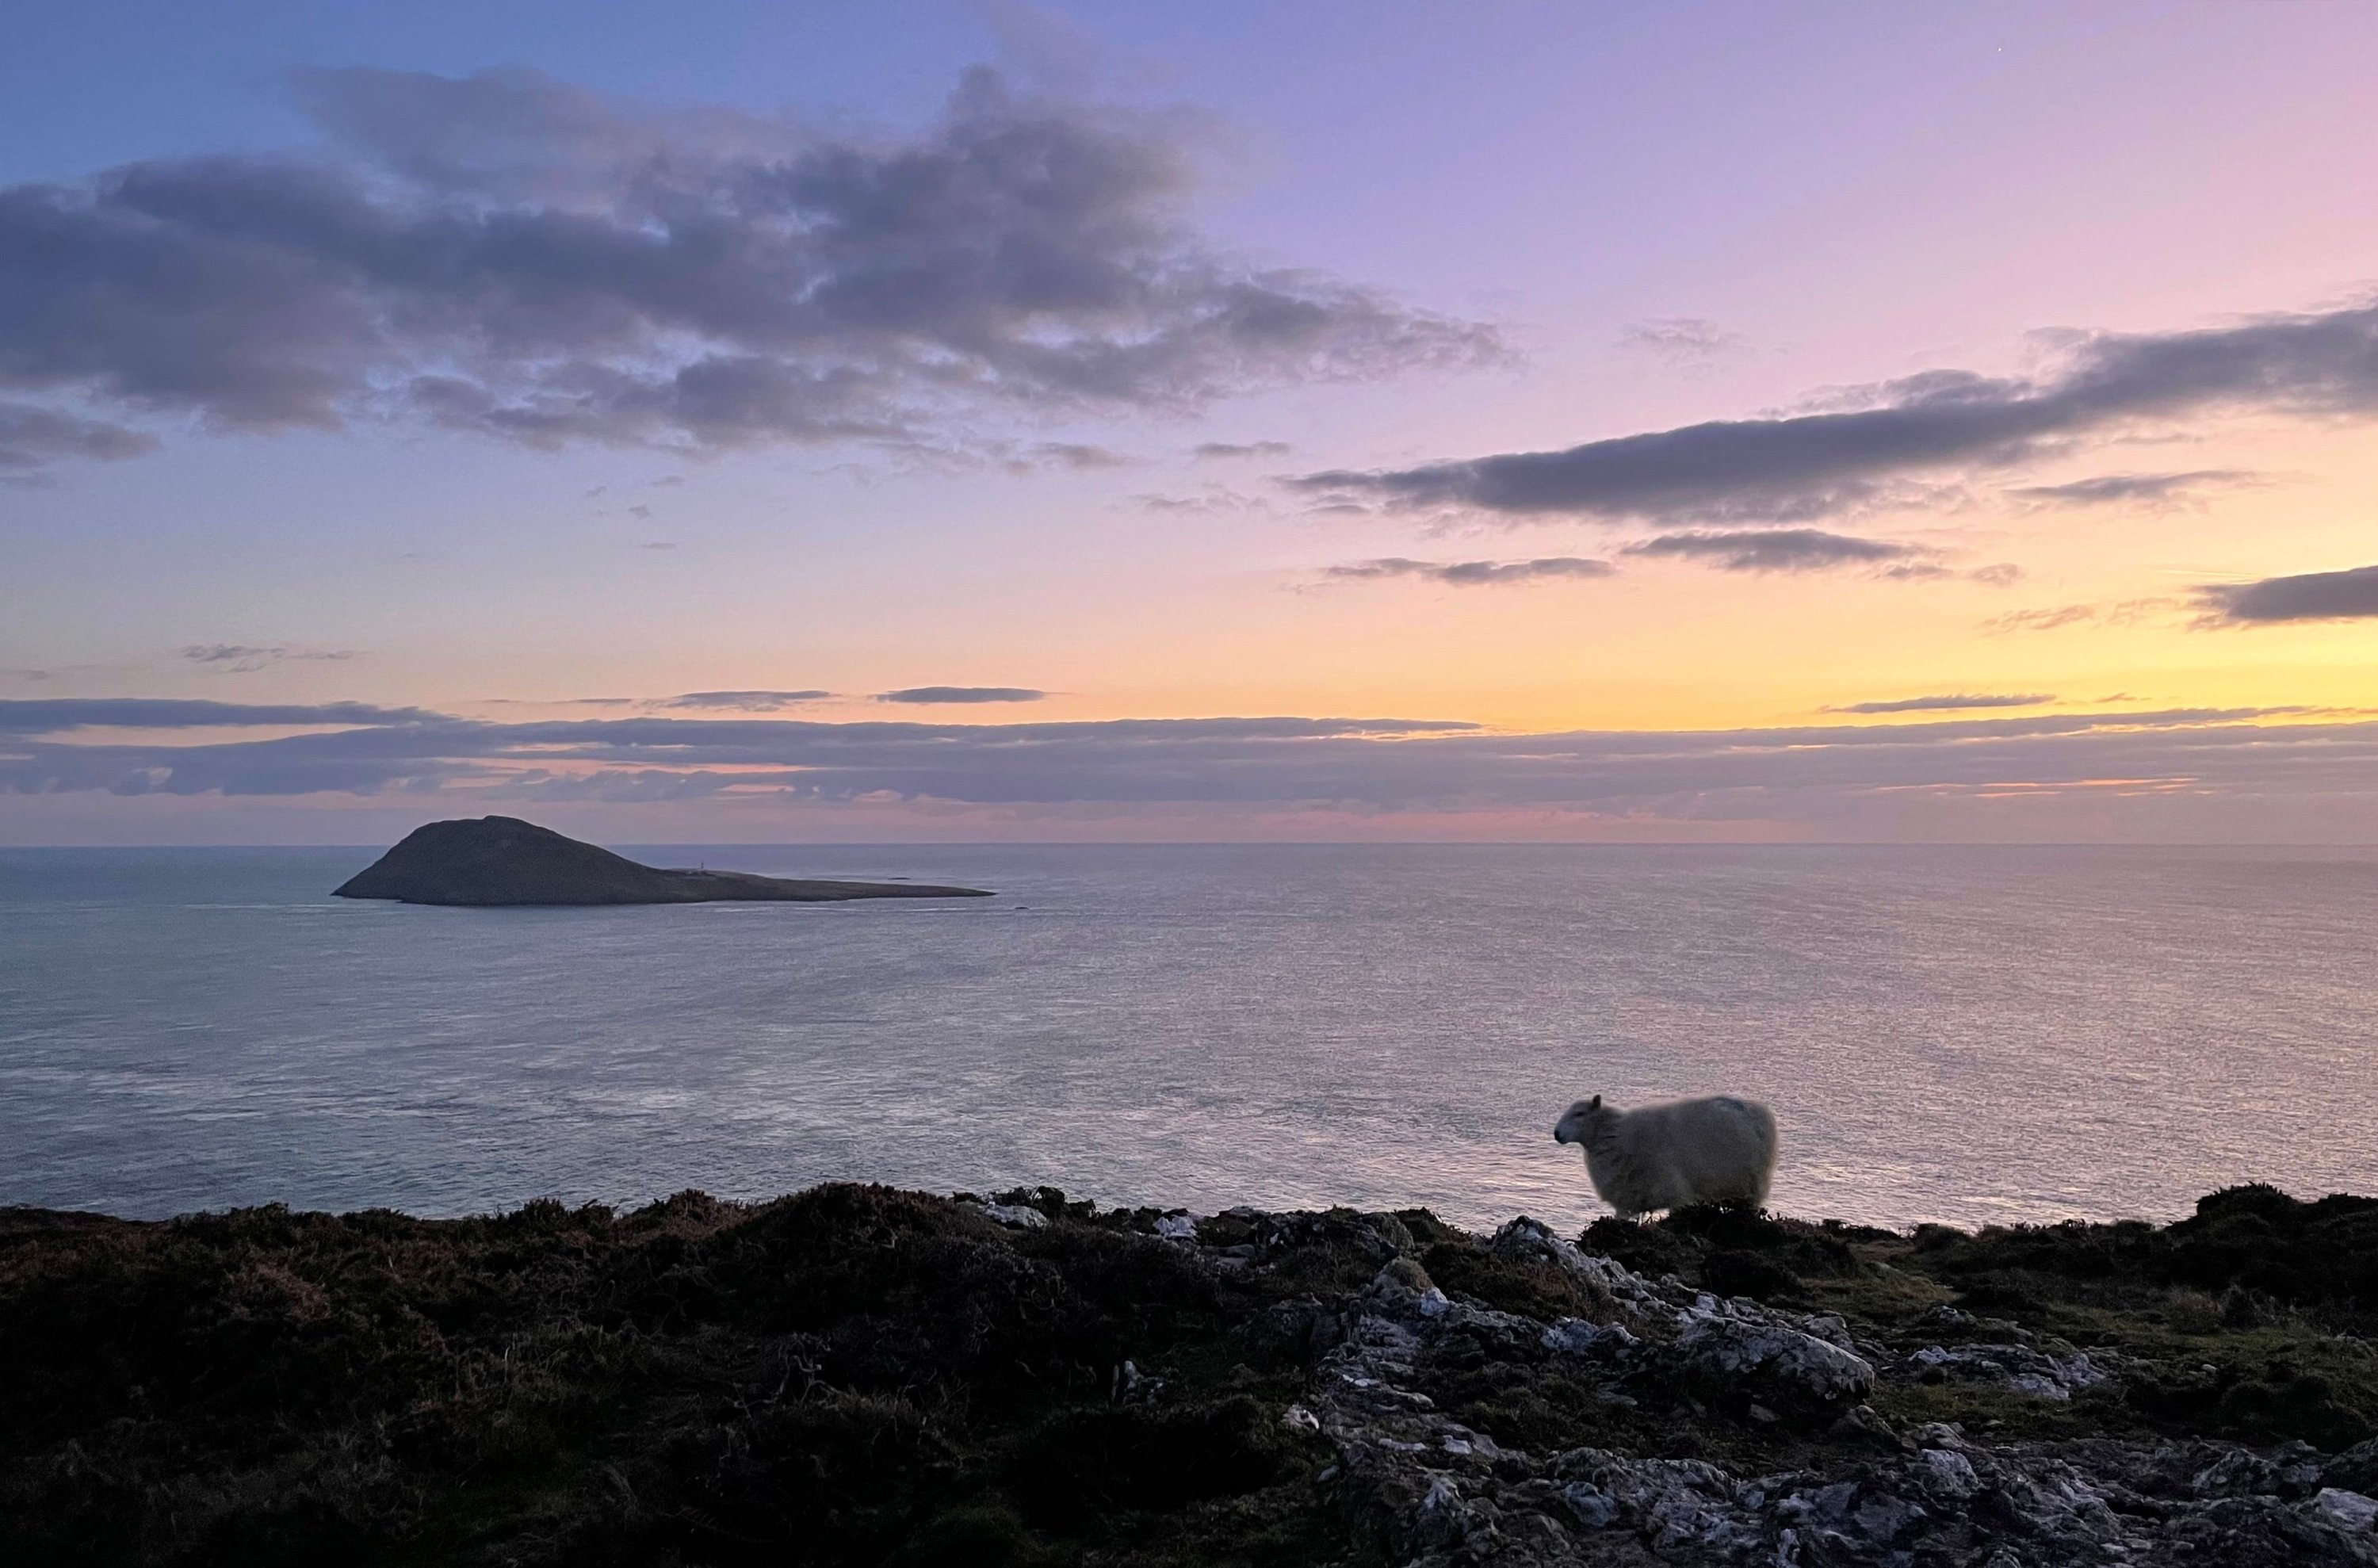 The island of Ynys Enlli, known as Bardsey Island in English, is pictured of the west coast of Wales, south west of Pwllheli, Feb. 26, 2023. (AFP Photo)